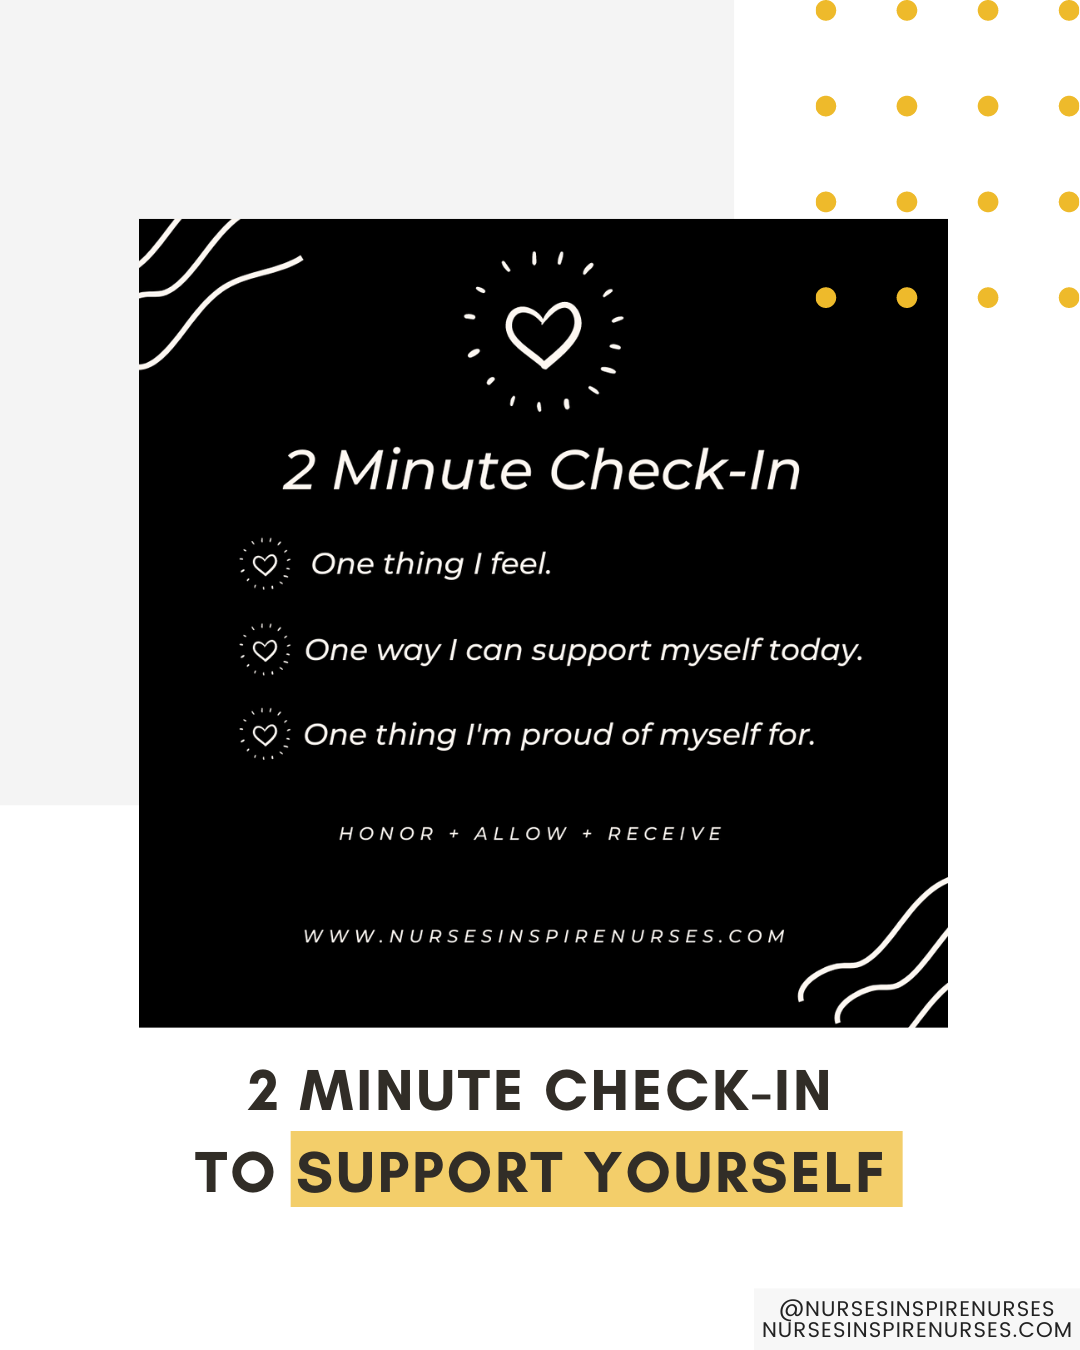 2 Minute Check-In Guide to Support Yourself!